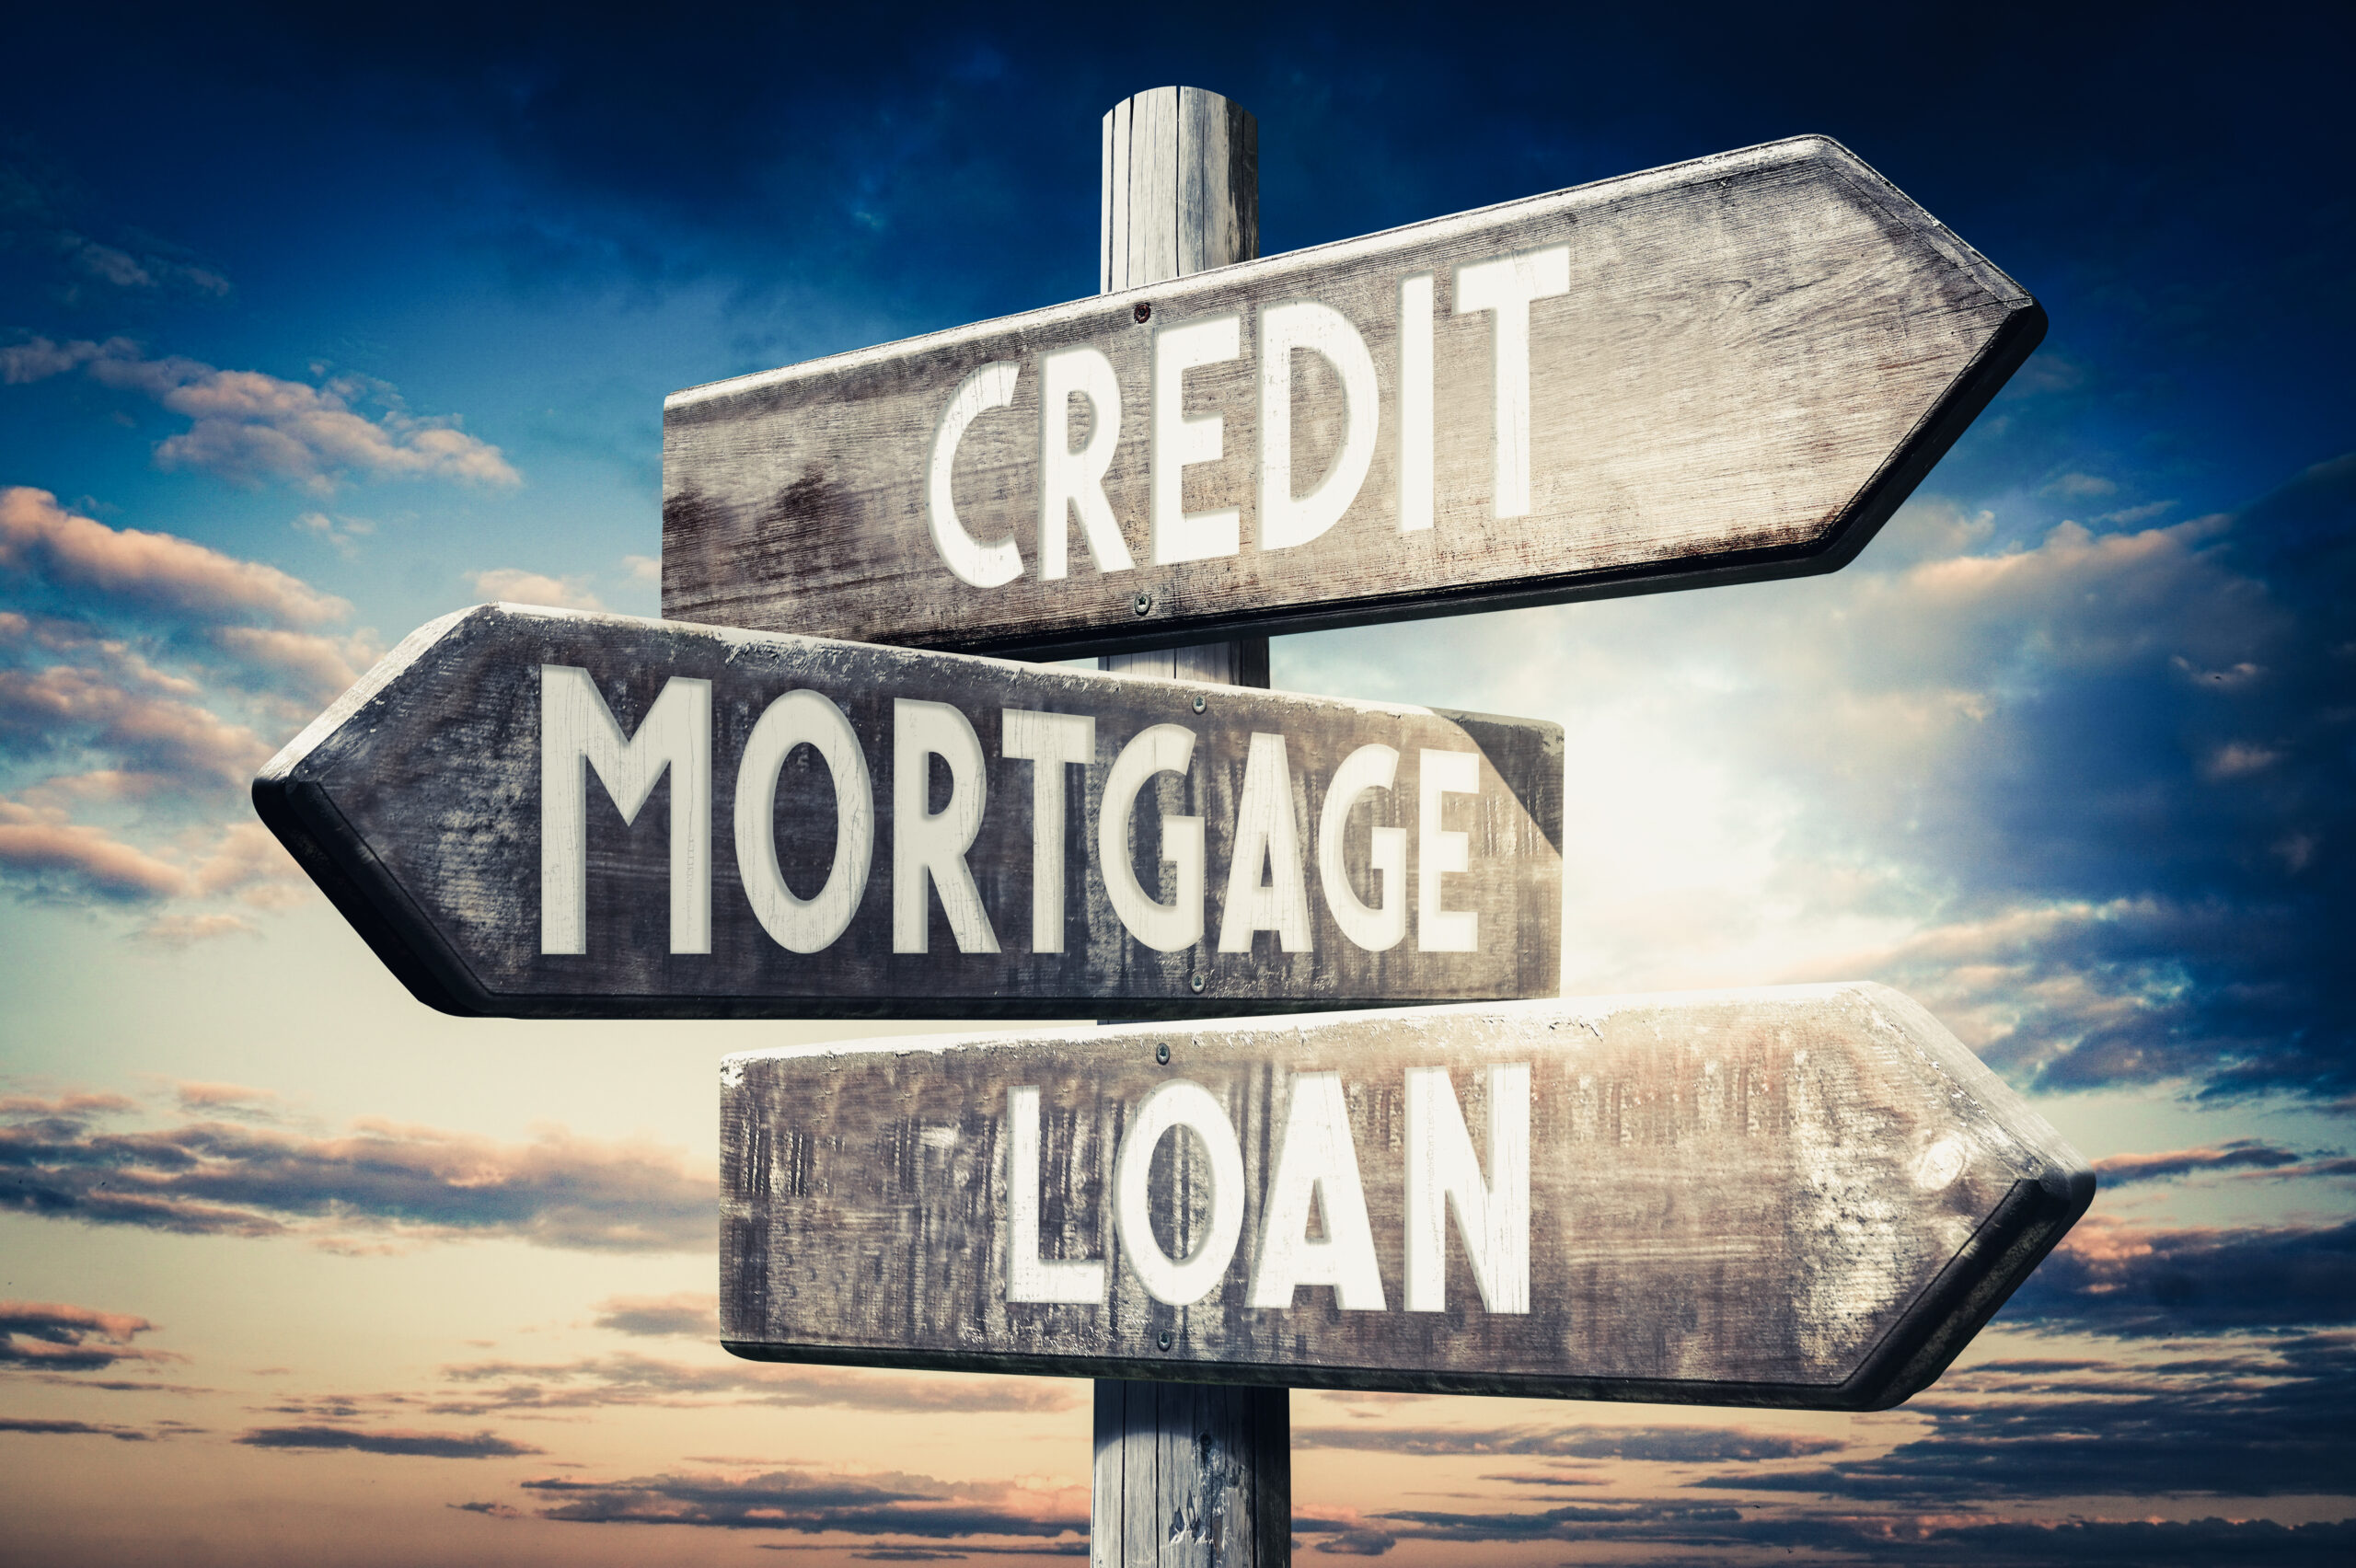 The Type of the Mortgage Loan and Required House Down Payments